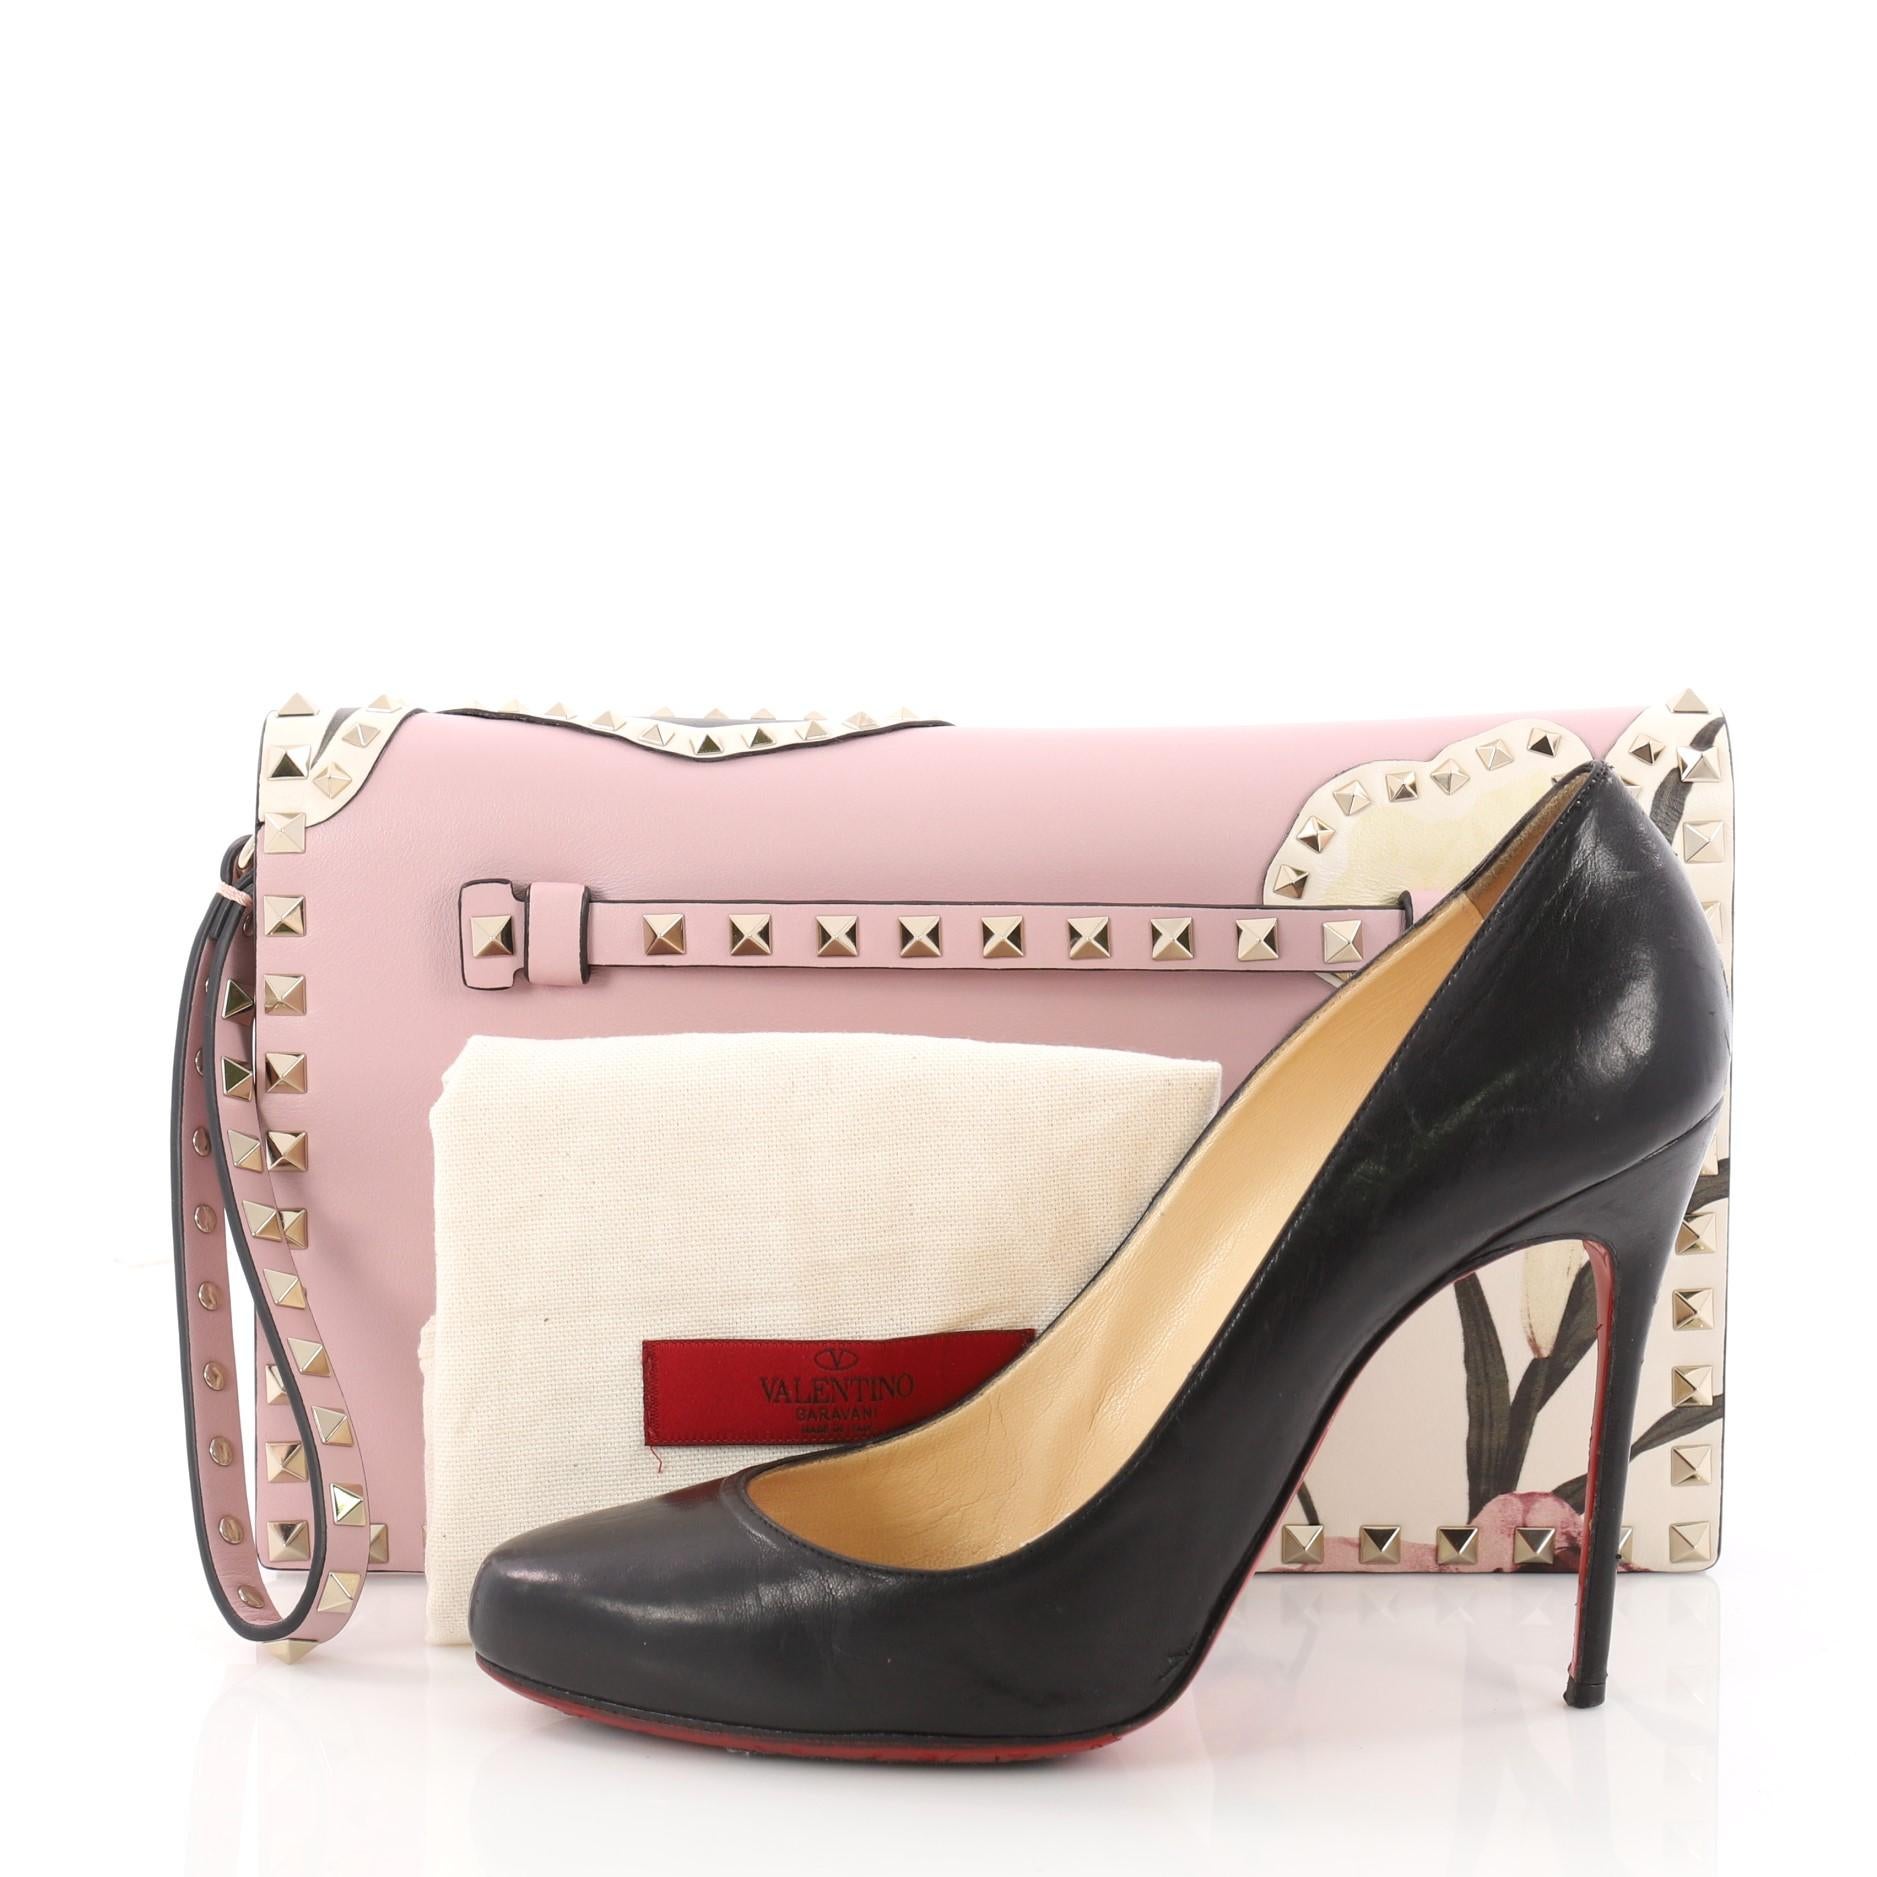 This authentic Valentino Rockstud Flap Clutch Patchwork Leather is a chic yet functional accessory perfect for on-the-go moments. Crafted from pink leather, this trendy clutch features polished gold Valentino signature rockstuds detailing, lasercut